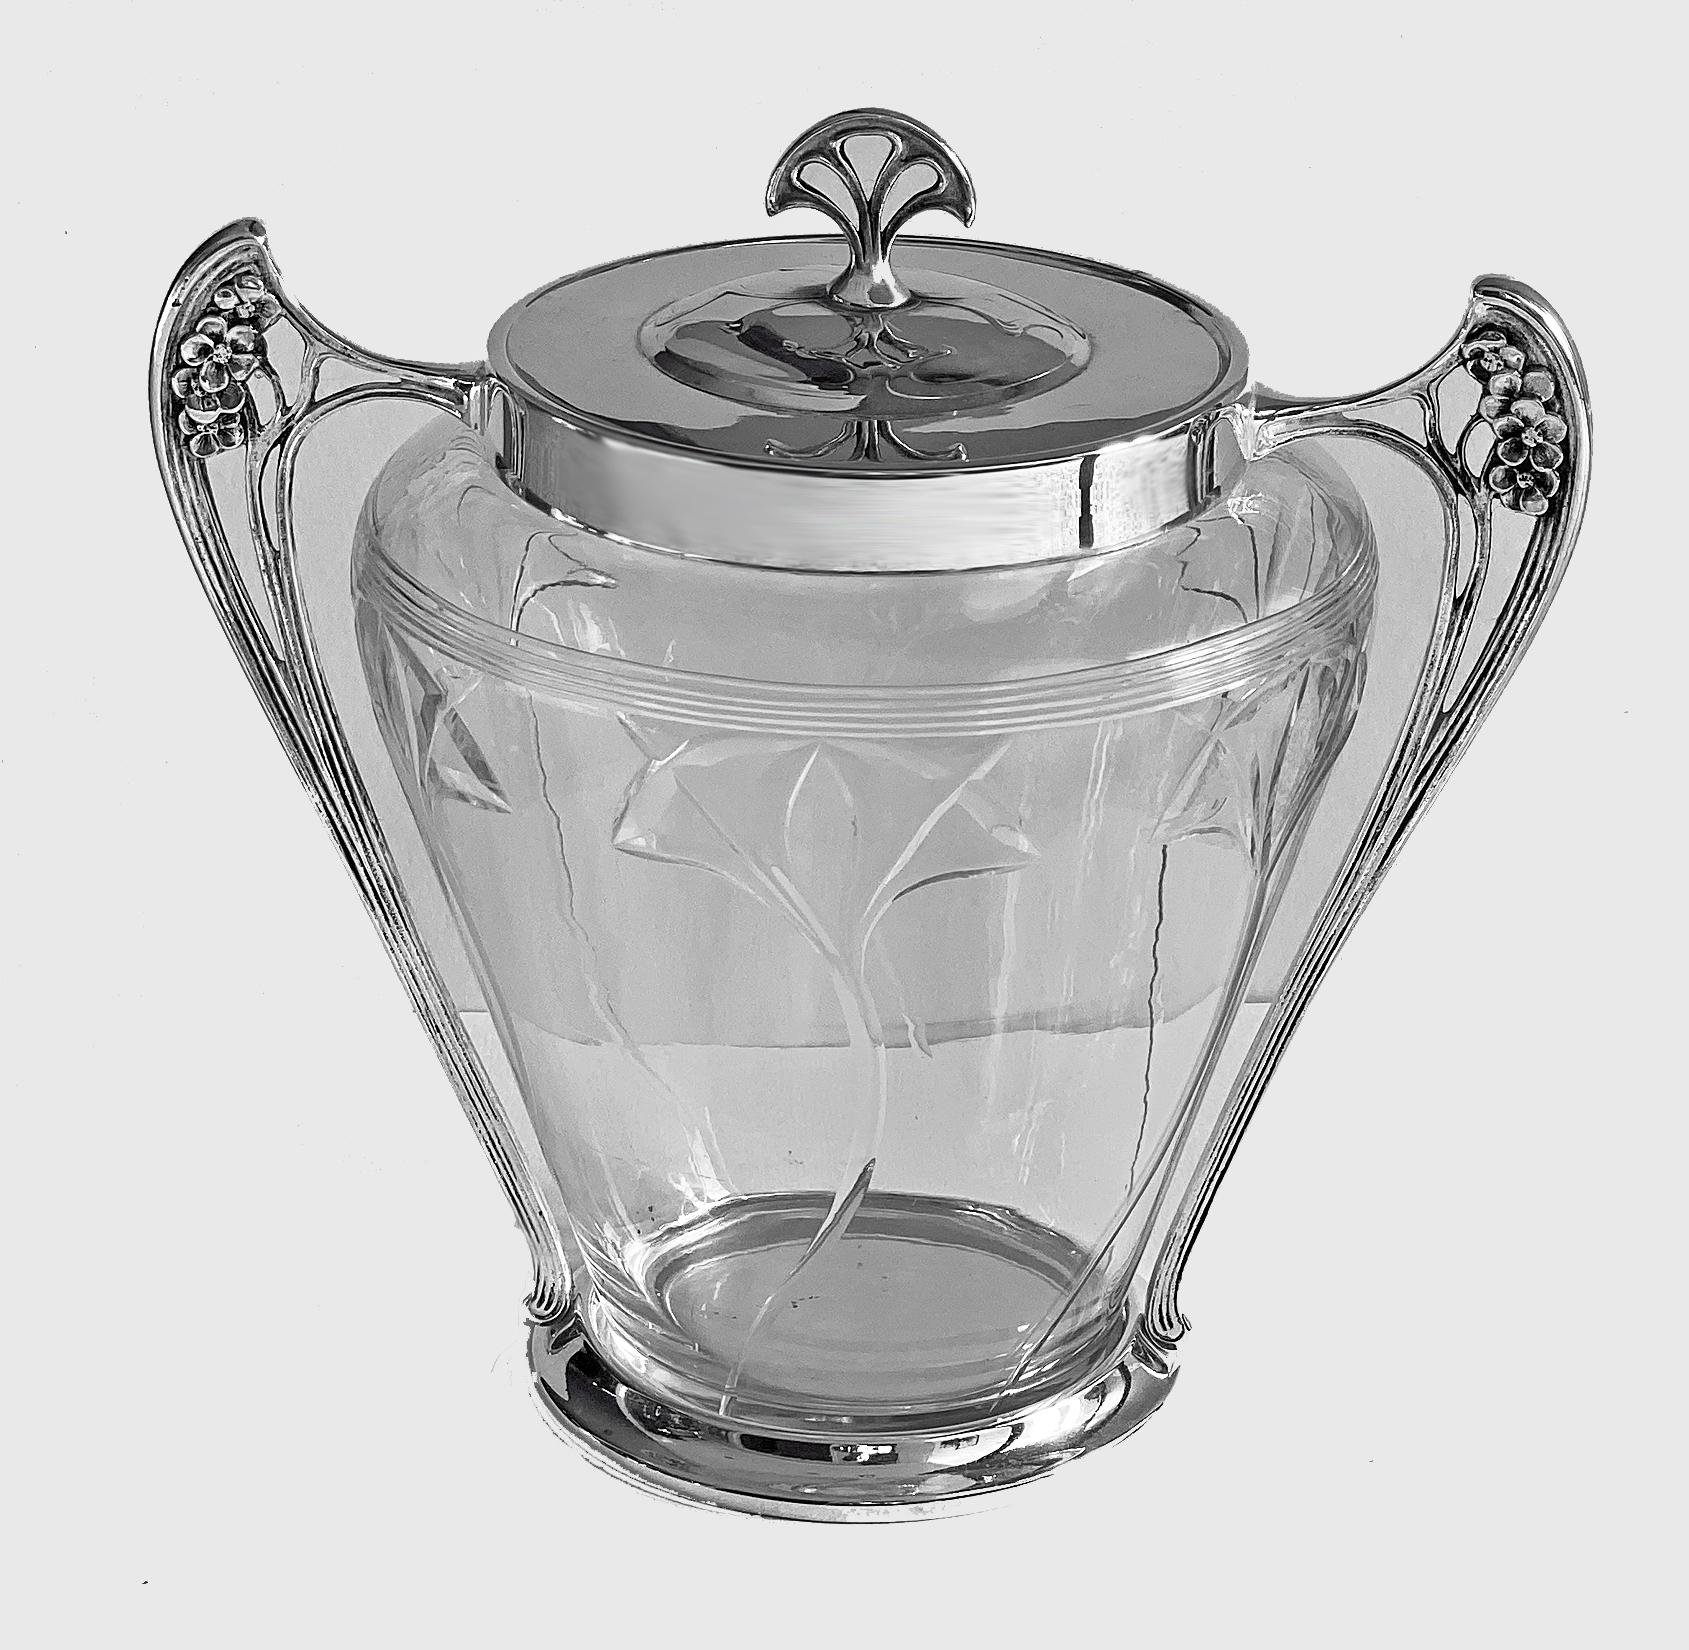 Jugendstil Art Nouveau secessionist silver plated stylized cut-glass biscuit box. Made in Geislingen, Germany, circa 1905 by WMF. The silver plate mount on circular base, supporting stylized handles, polished surround collar. Detachable plain